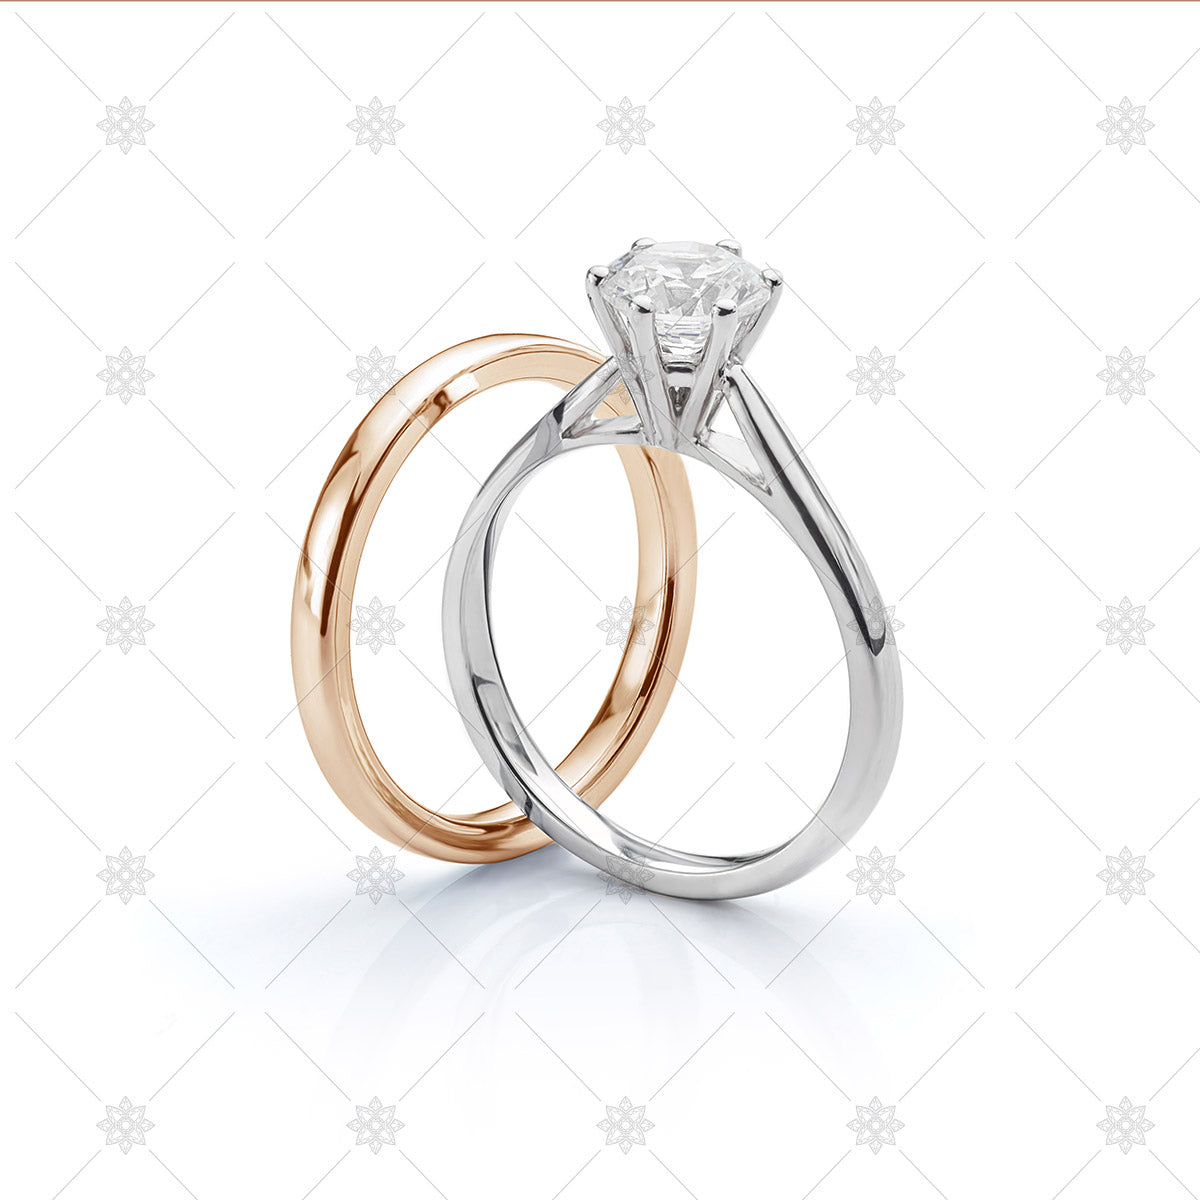 Rose Gold Wedding ring with WHite gold engagement ring